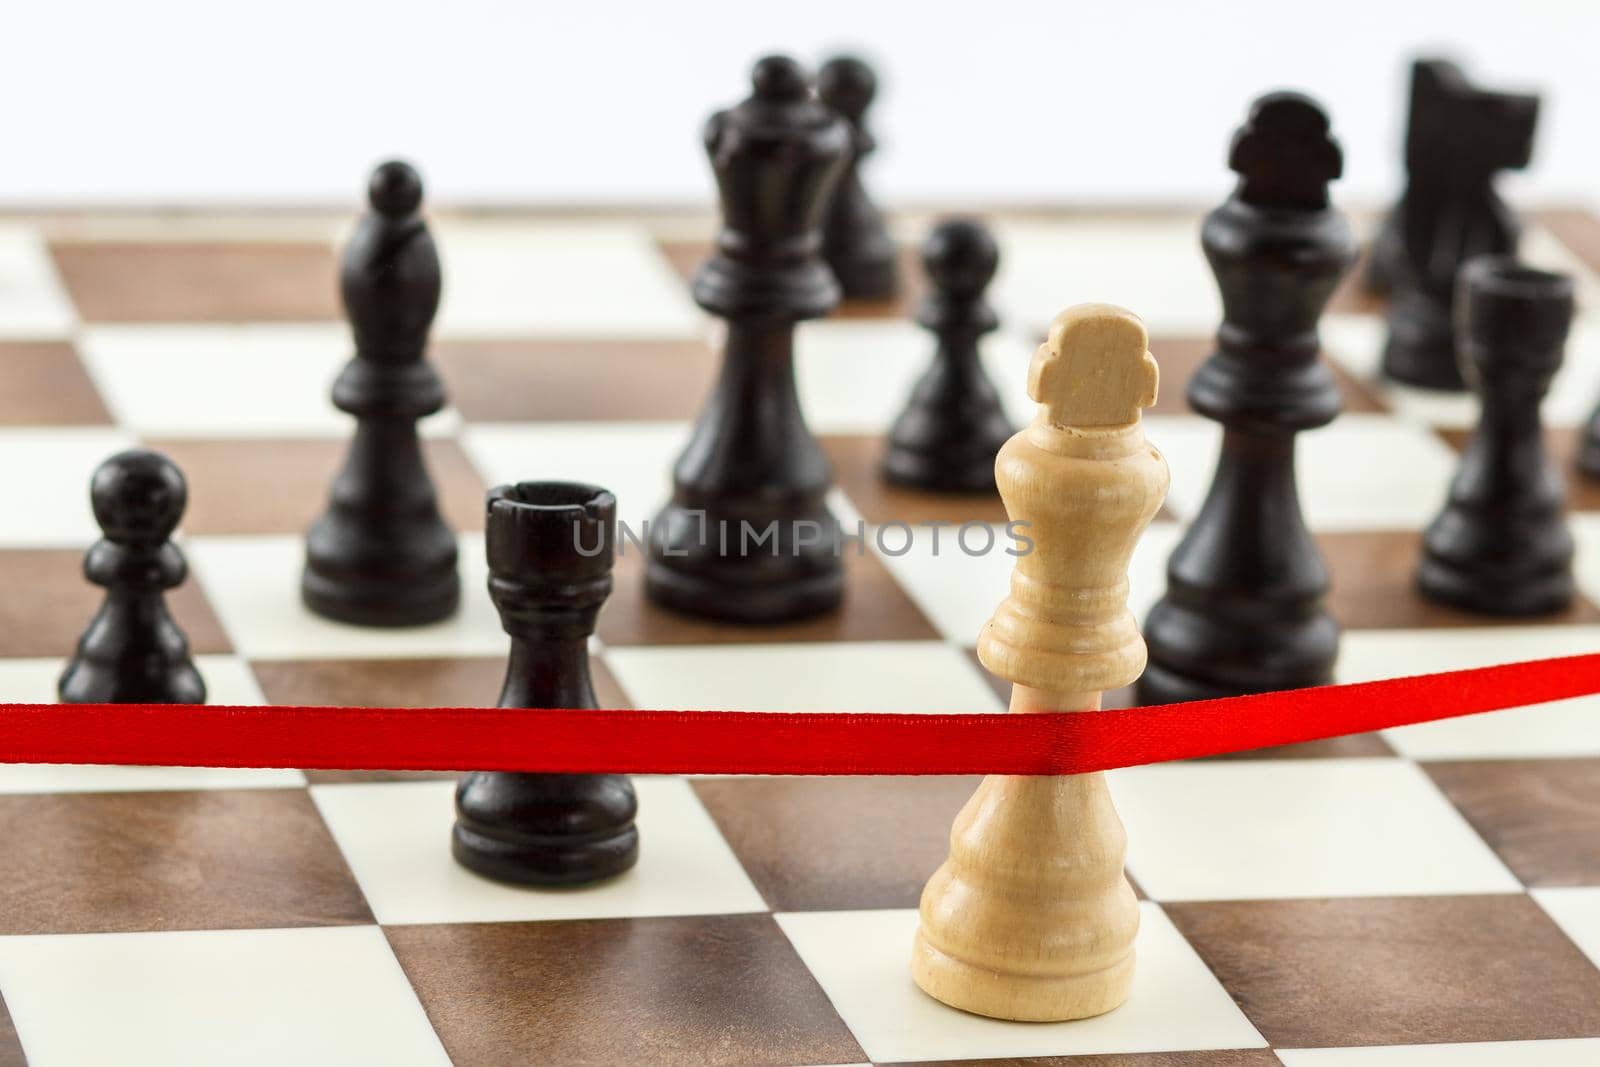 Business concept - strategy, competition, leadership, challenge. The King's figure is crossing the red finish ribbon